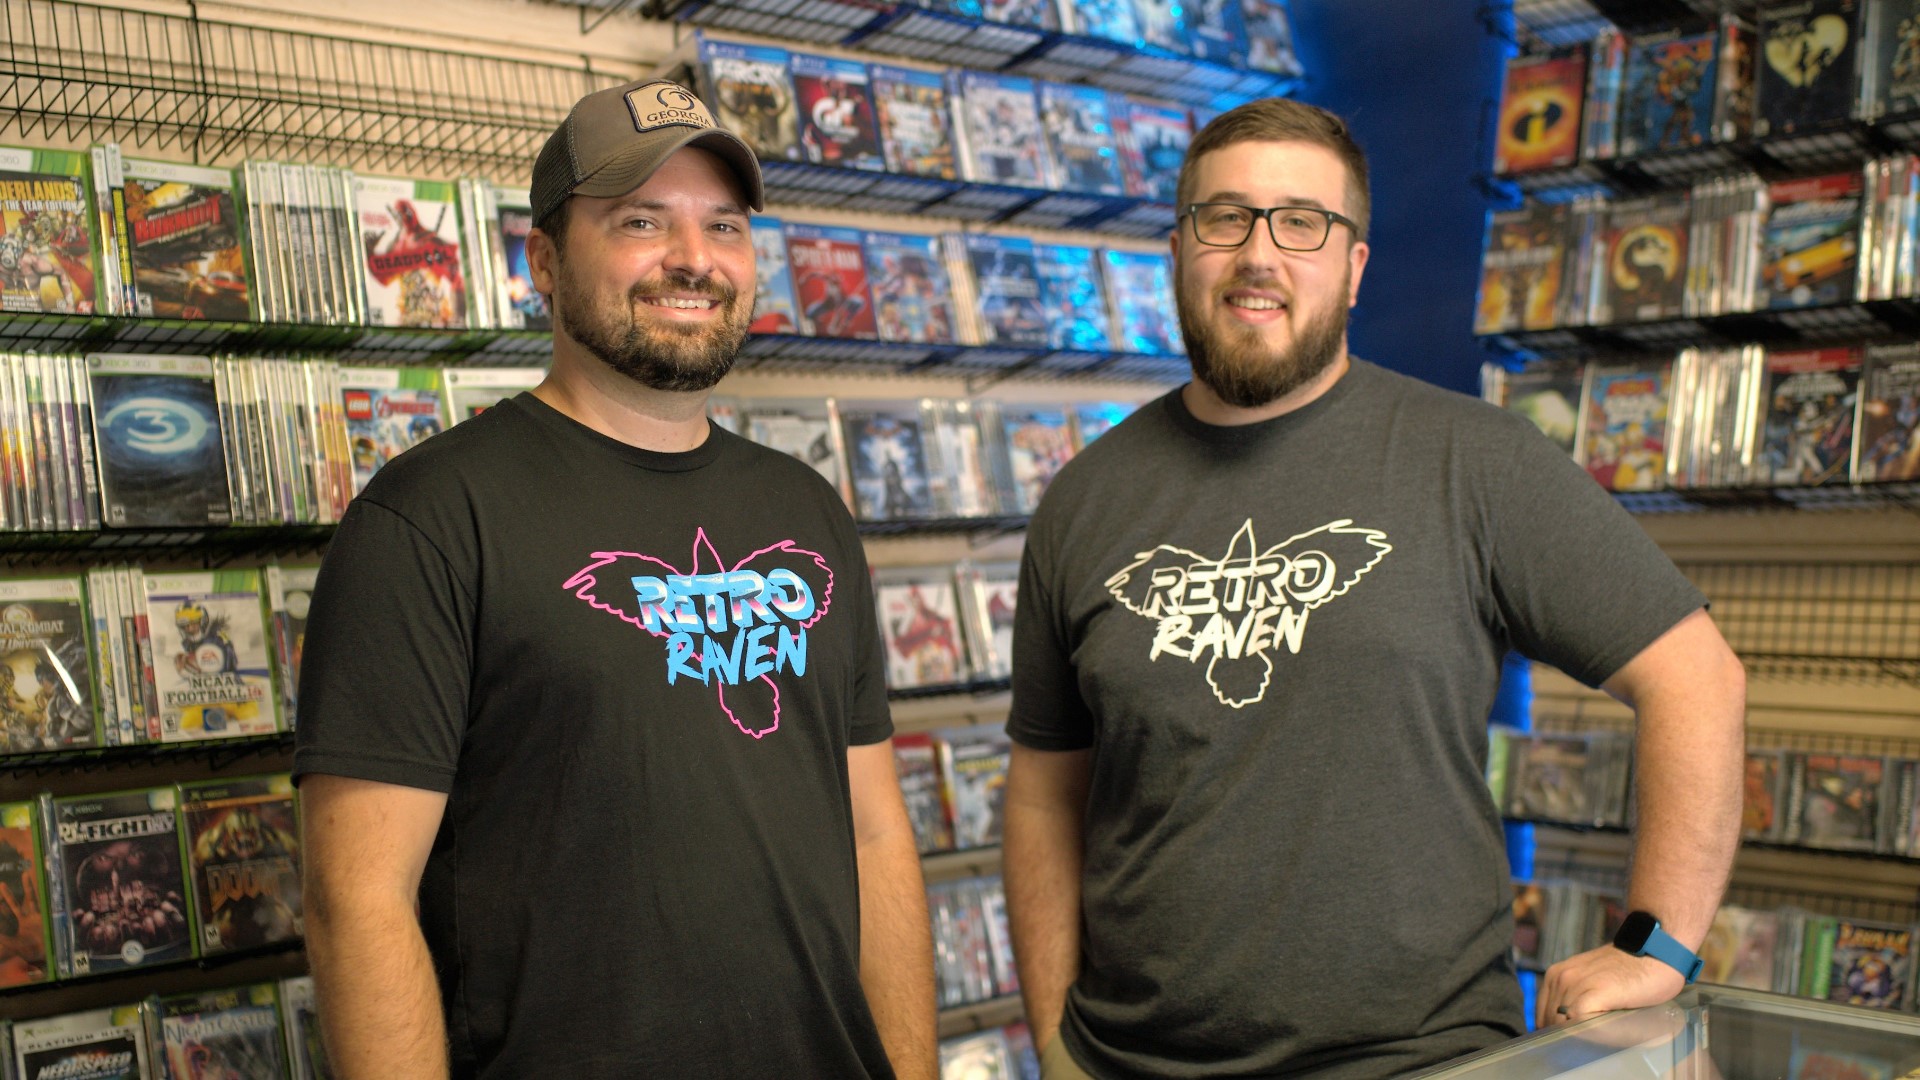 The shop's owner says the store specializes in selling classic video games and consuls.